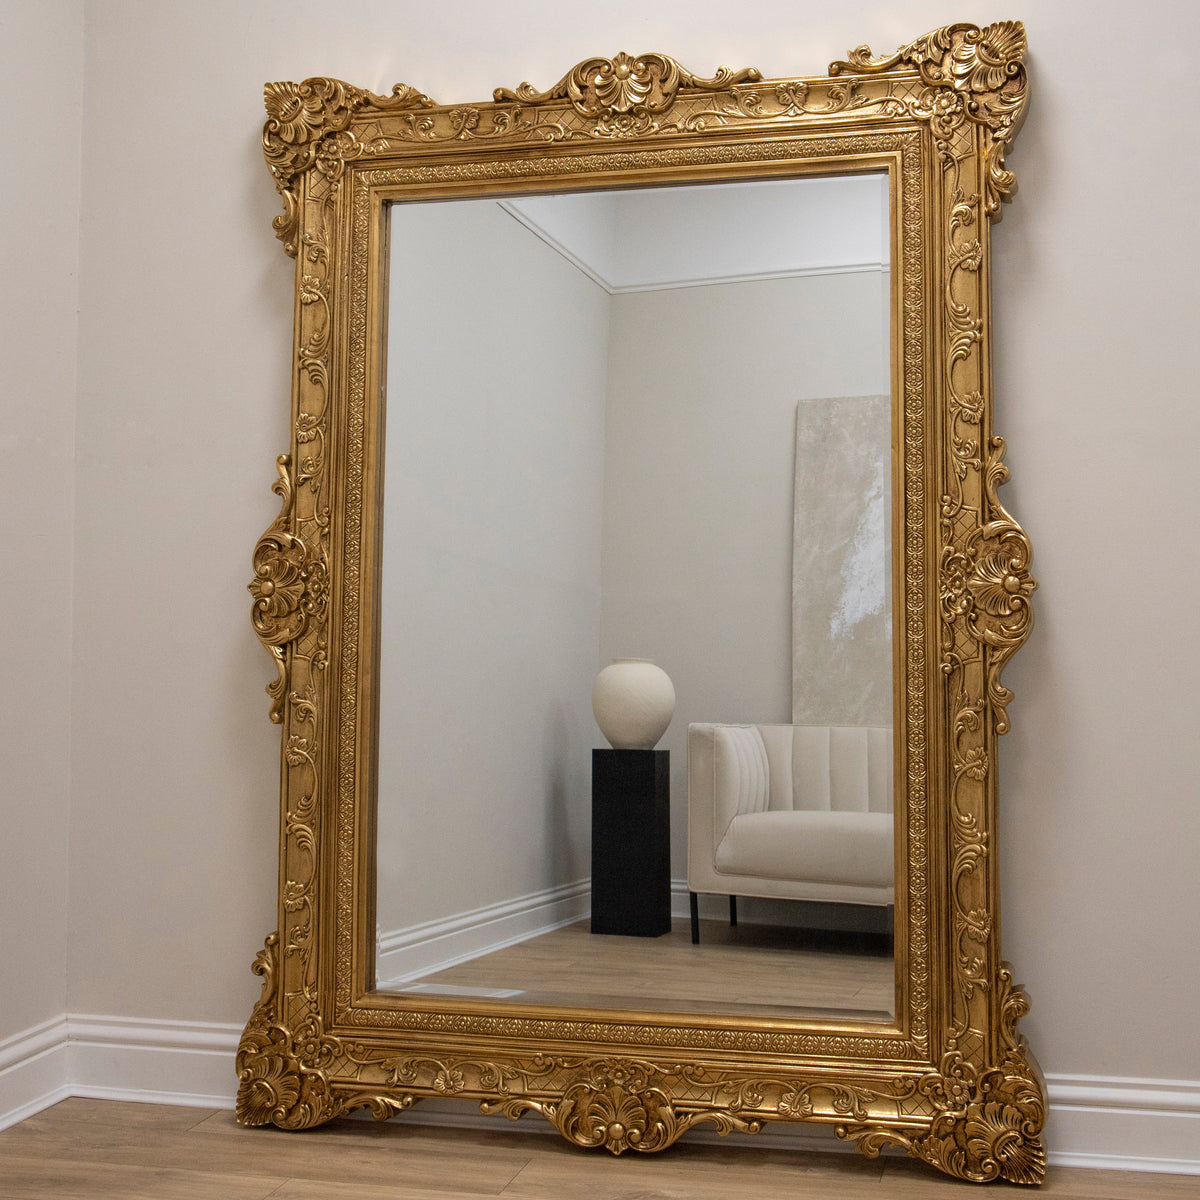 Gold Ornate Floor Mirror leaning against wall